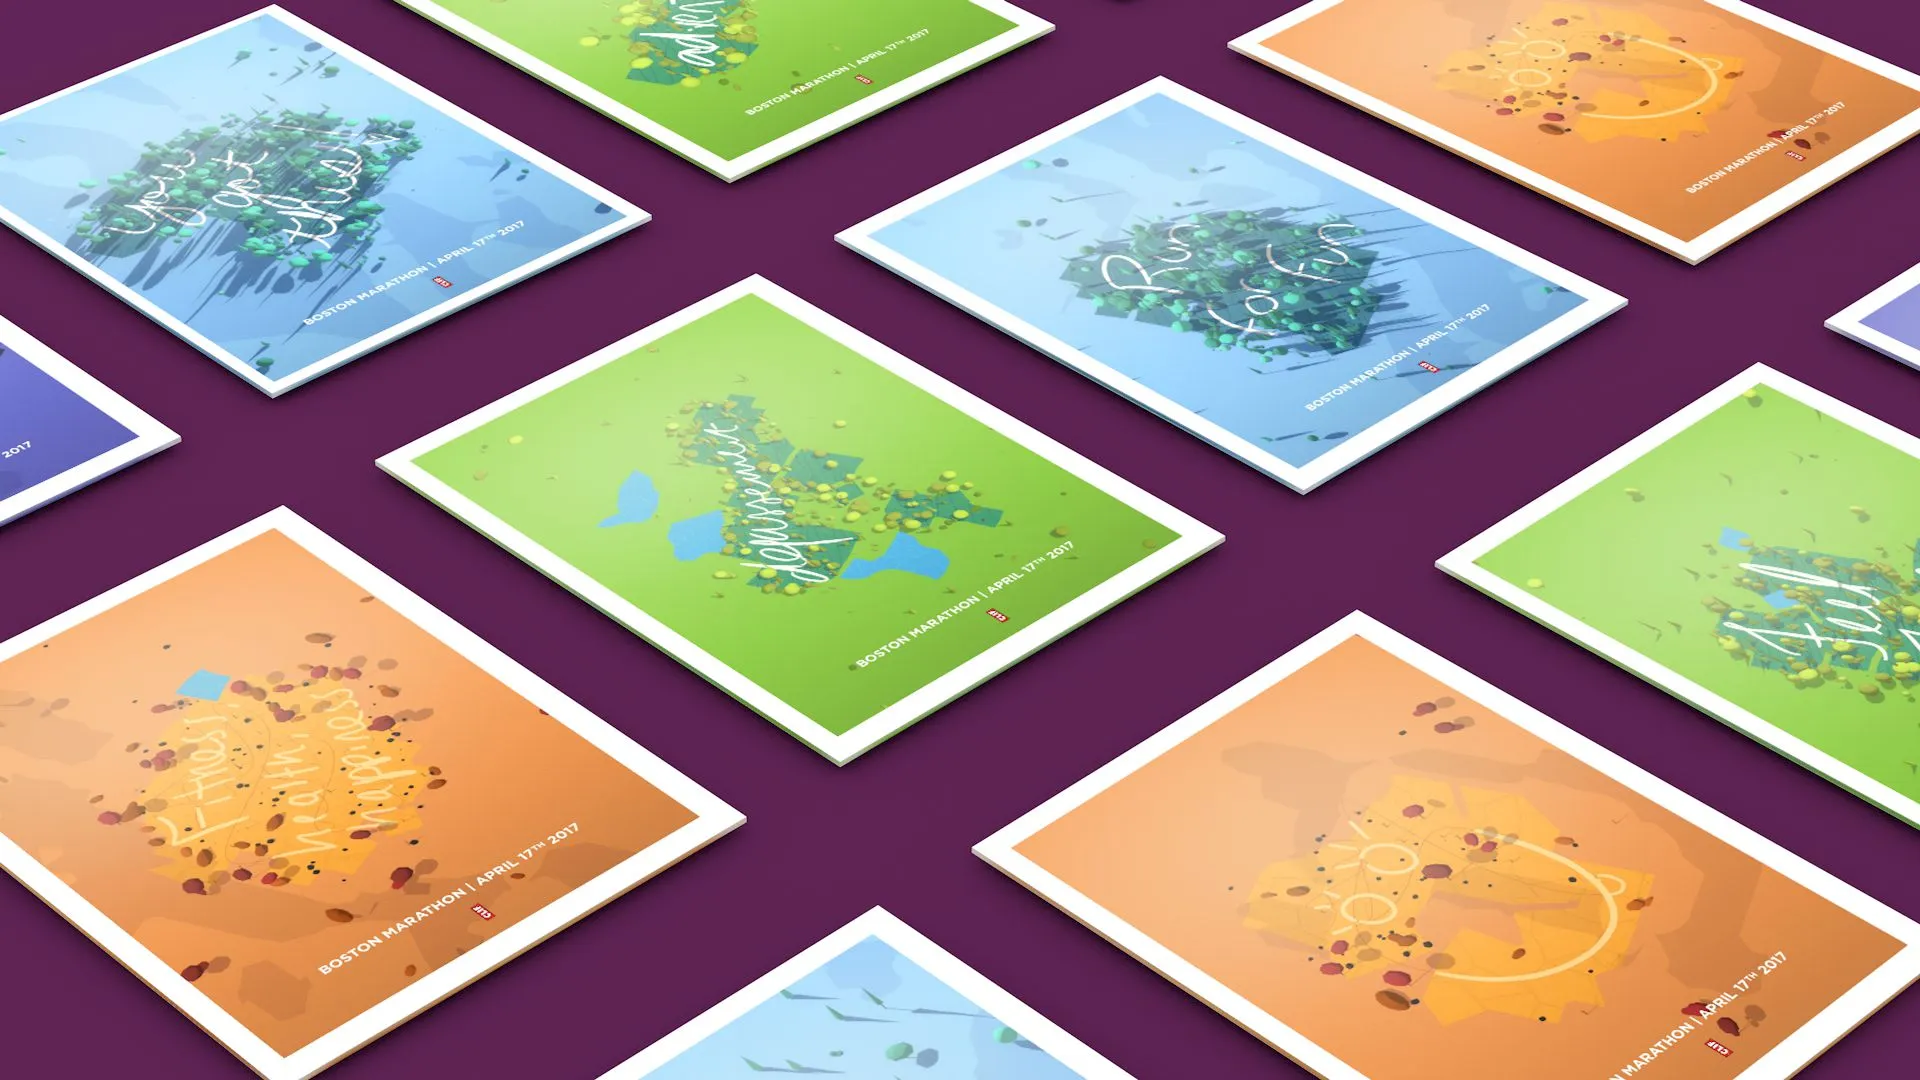 Clif Mantra Maker: Printed posters that show individual computer generated artful landscapes